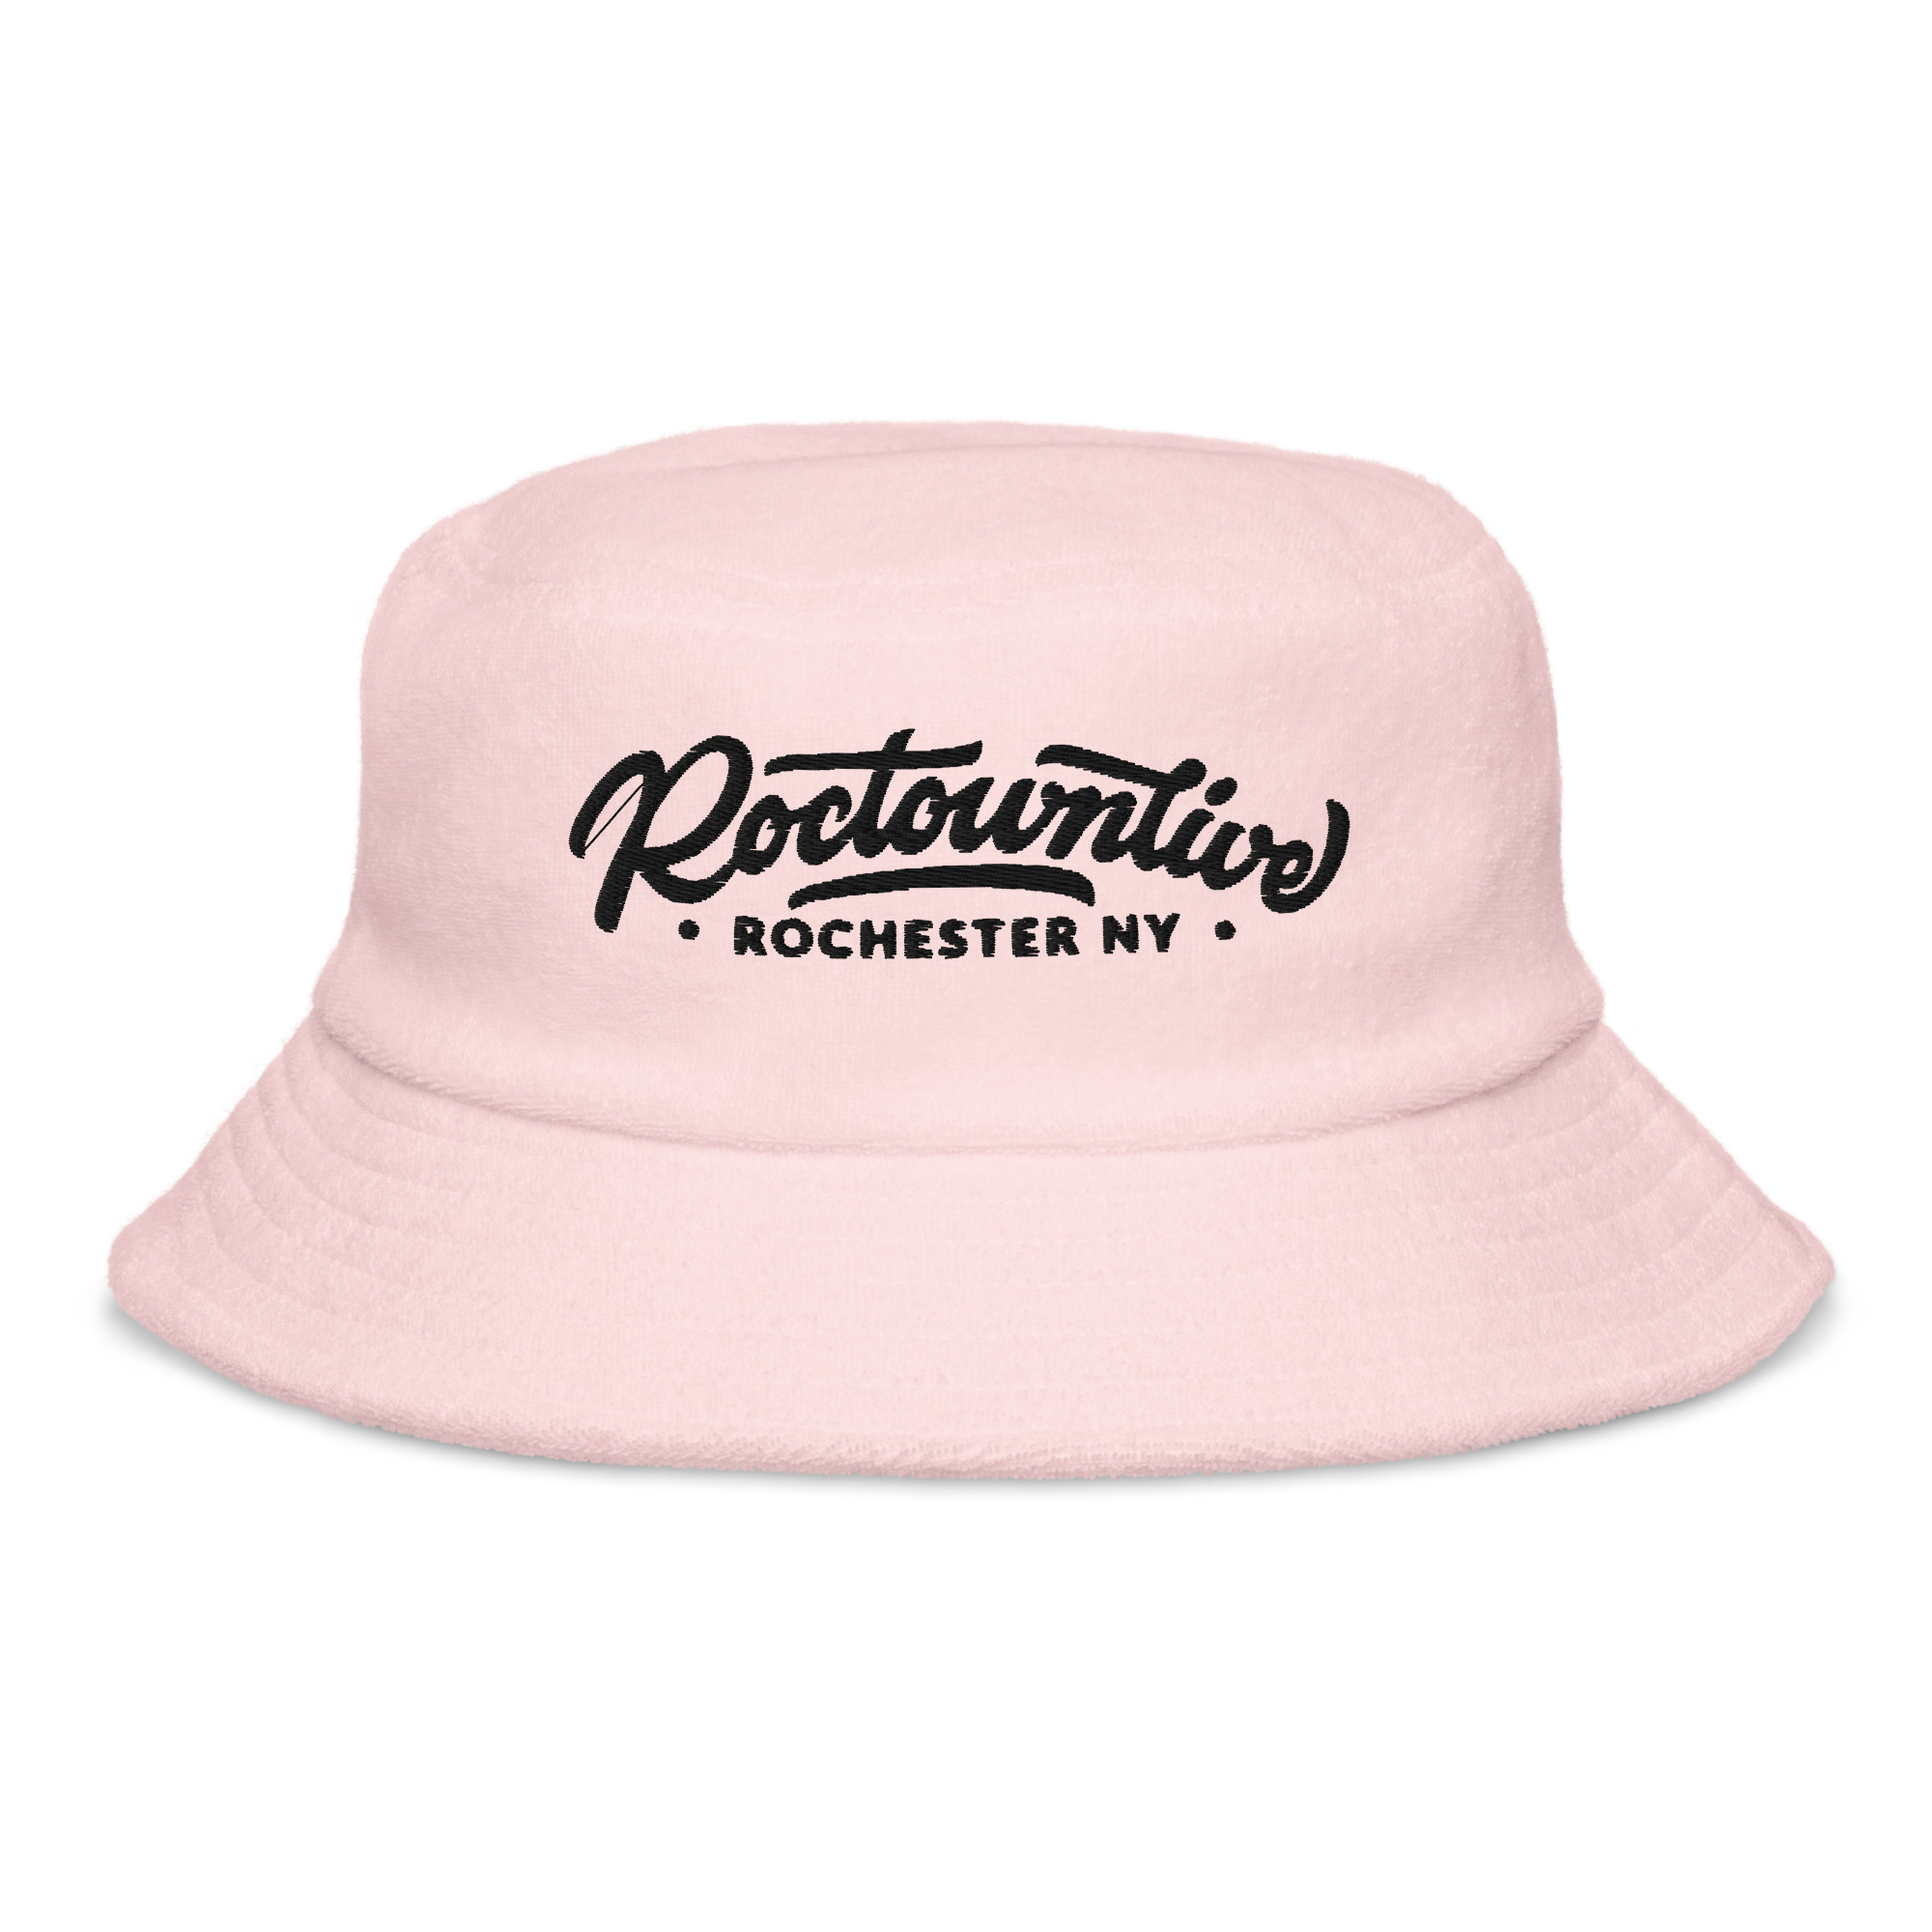 unstructured-terry-cloth-bucket-hat-light-pink-front-6304fa78bf9db.jpg